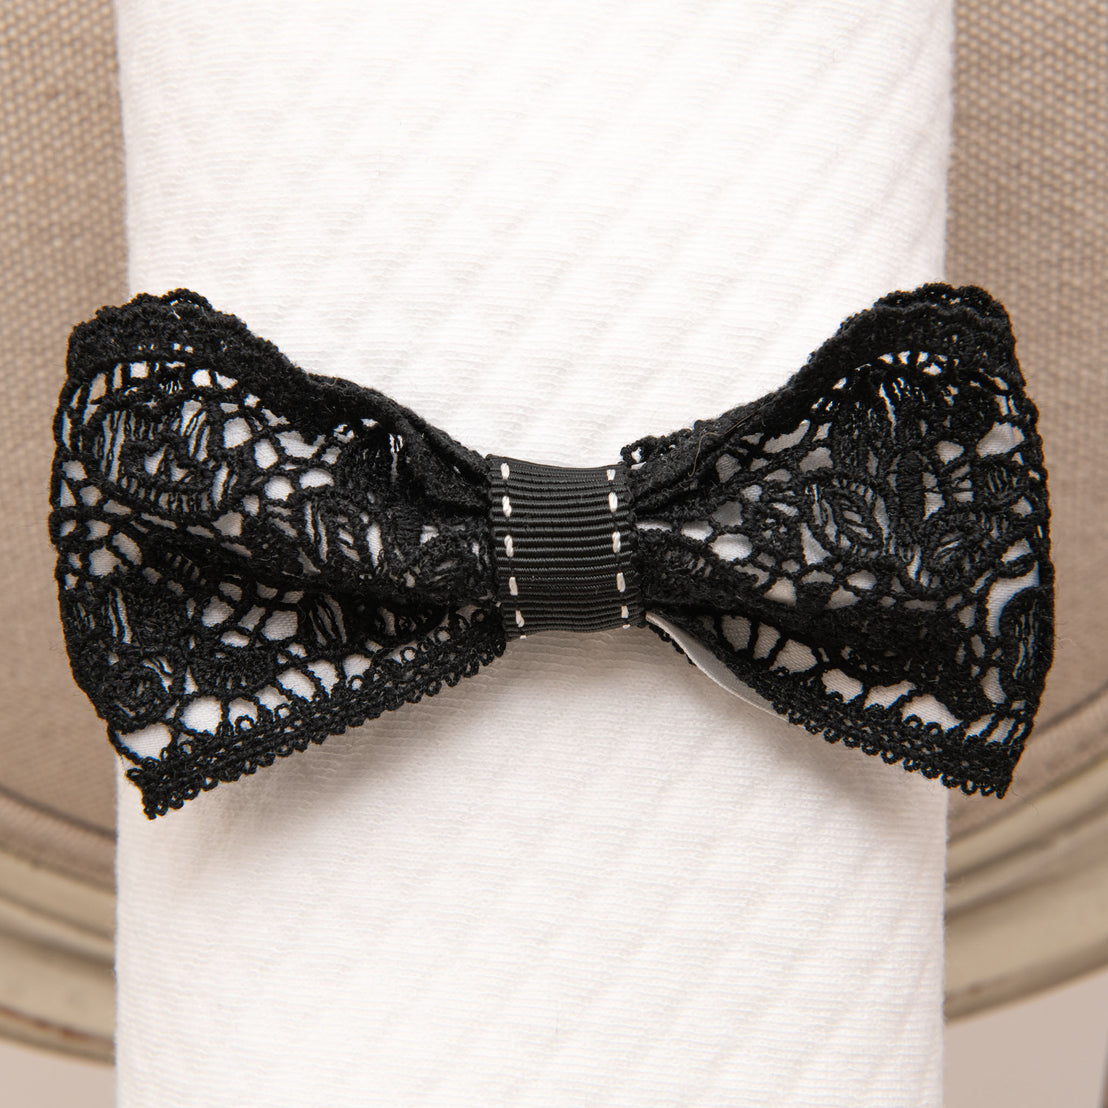 A stylish black June Lace Bow Headband clasping a white wrapped baby blanket, set against a neutral background. The bow features intricate lace patterns with scalloped edges.